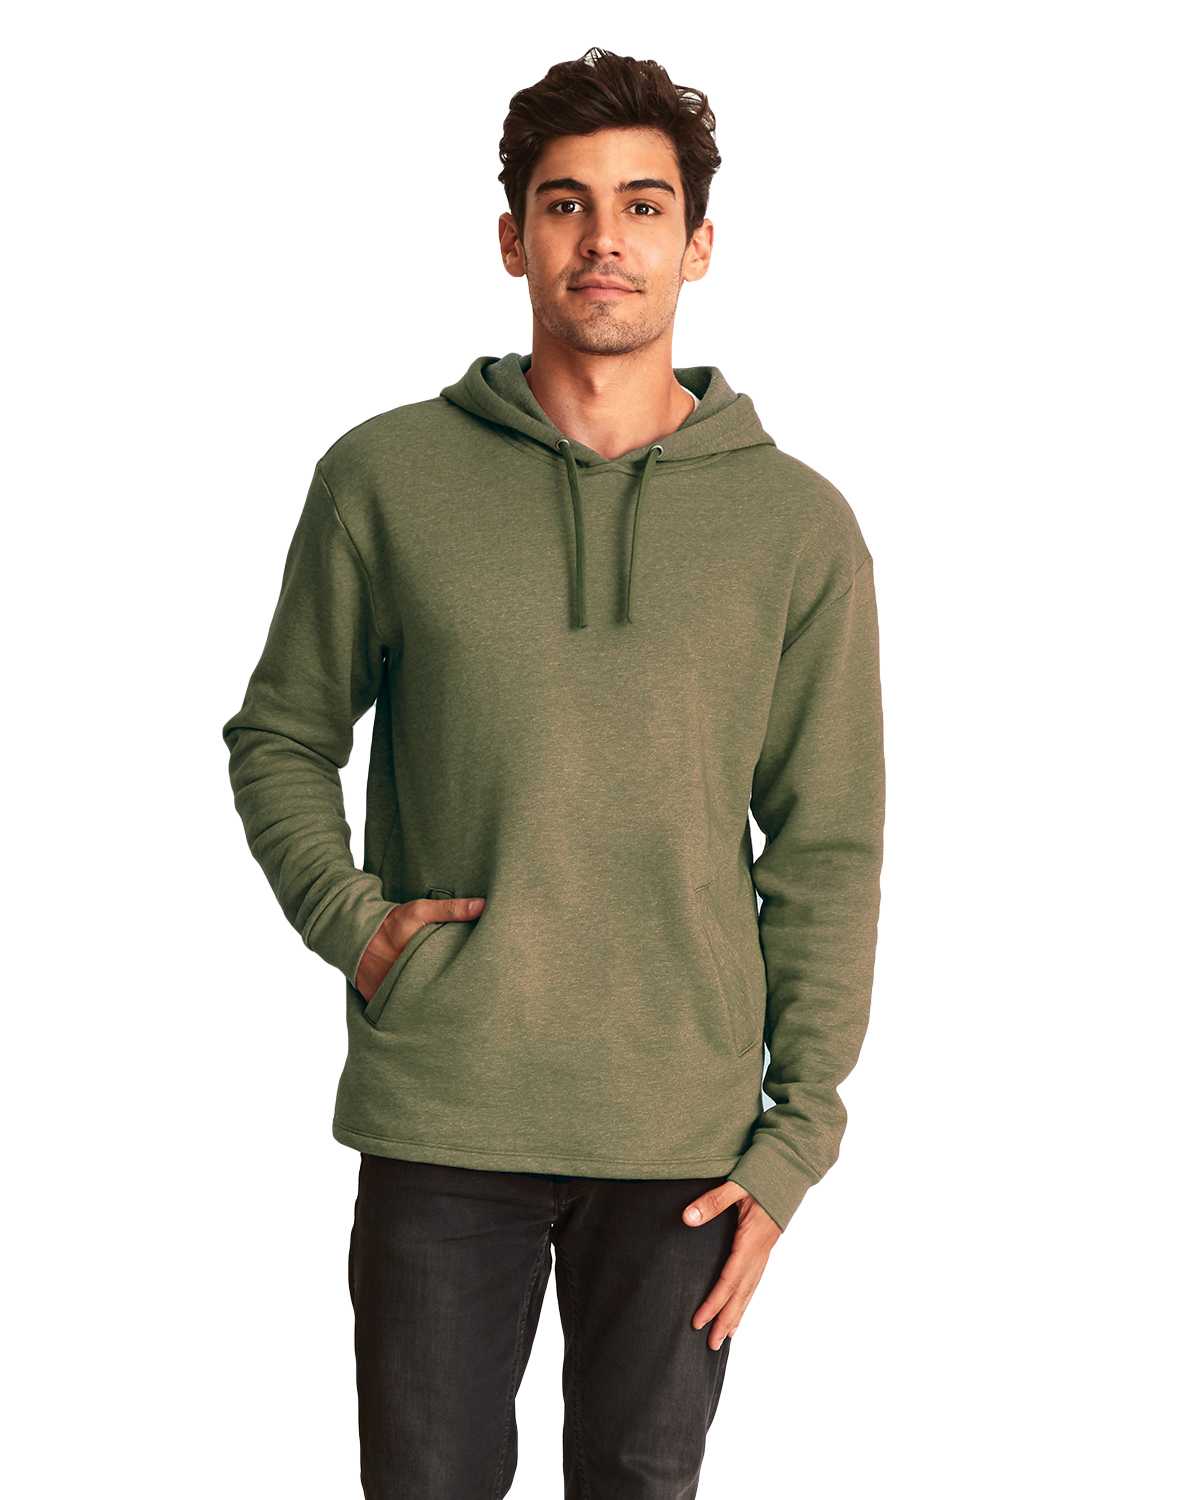 Next Level 9300 Adult PCH Pullover Hoody | ApparelChoice.com